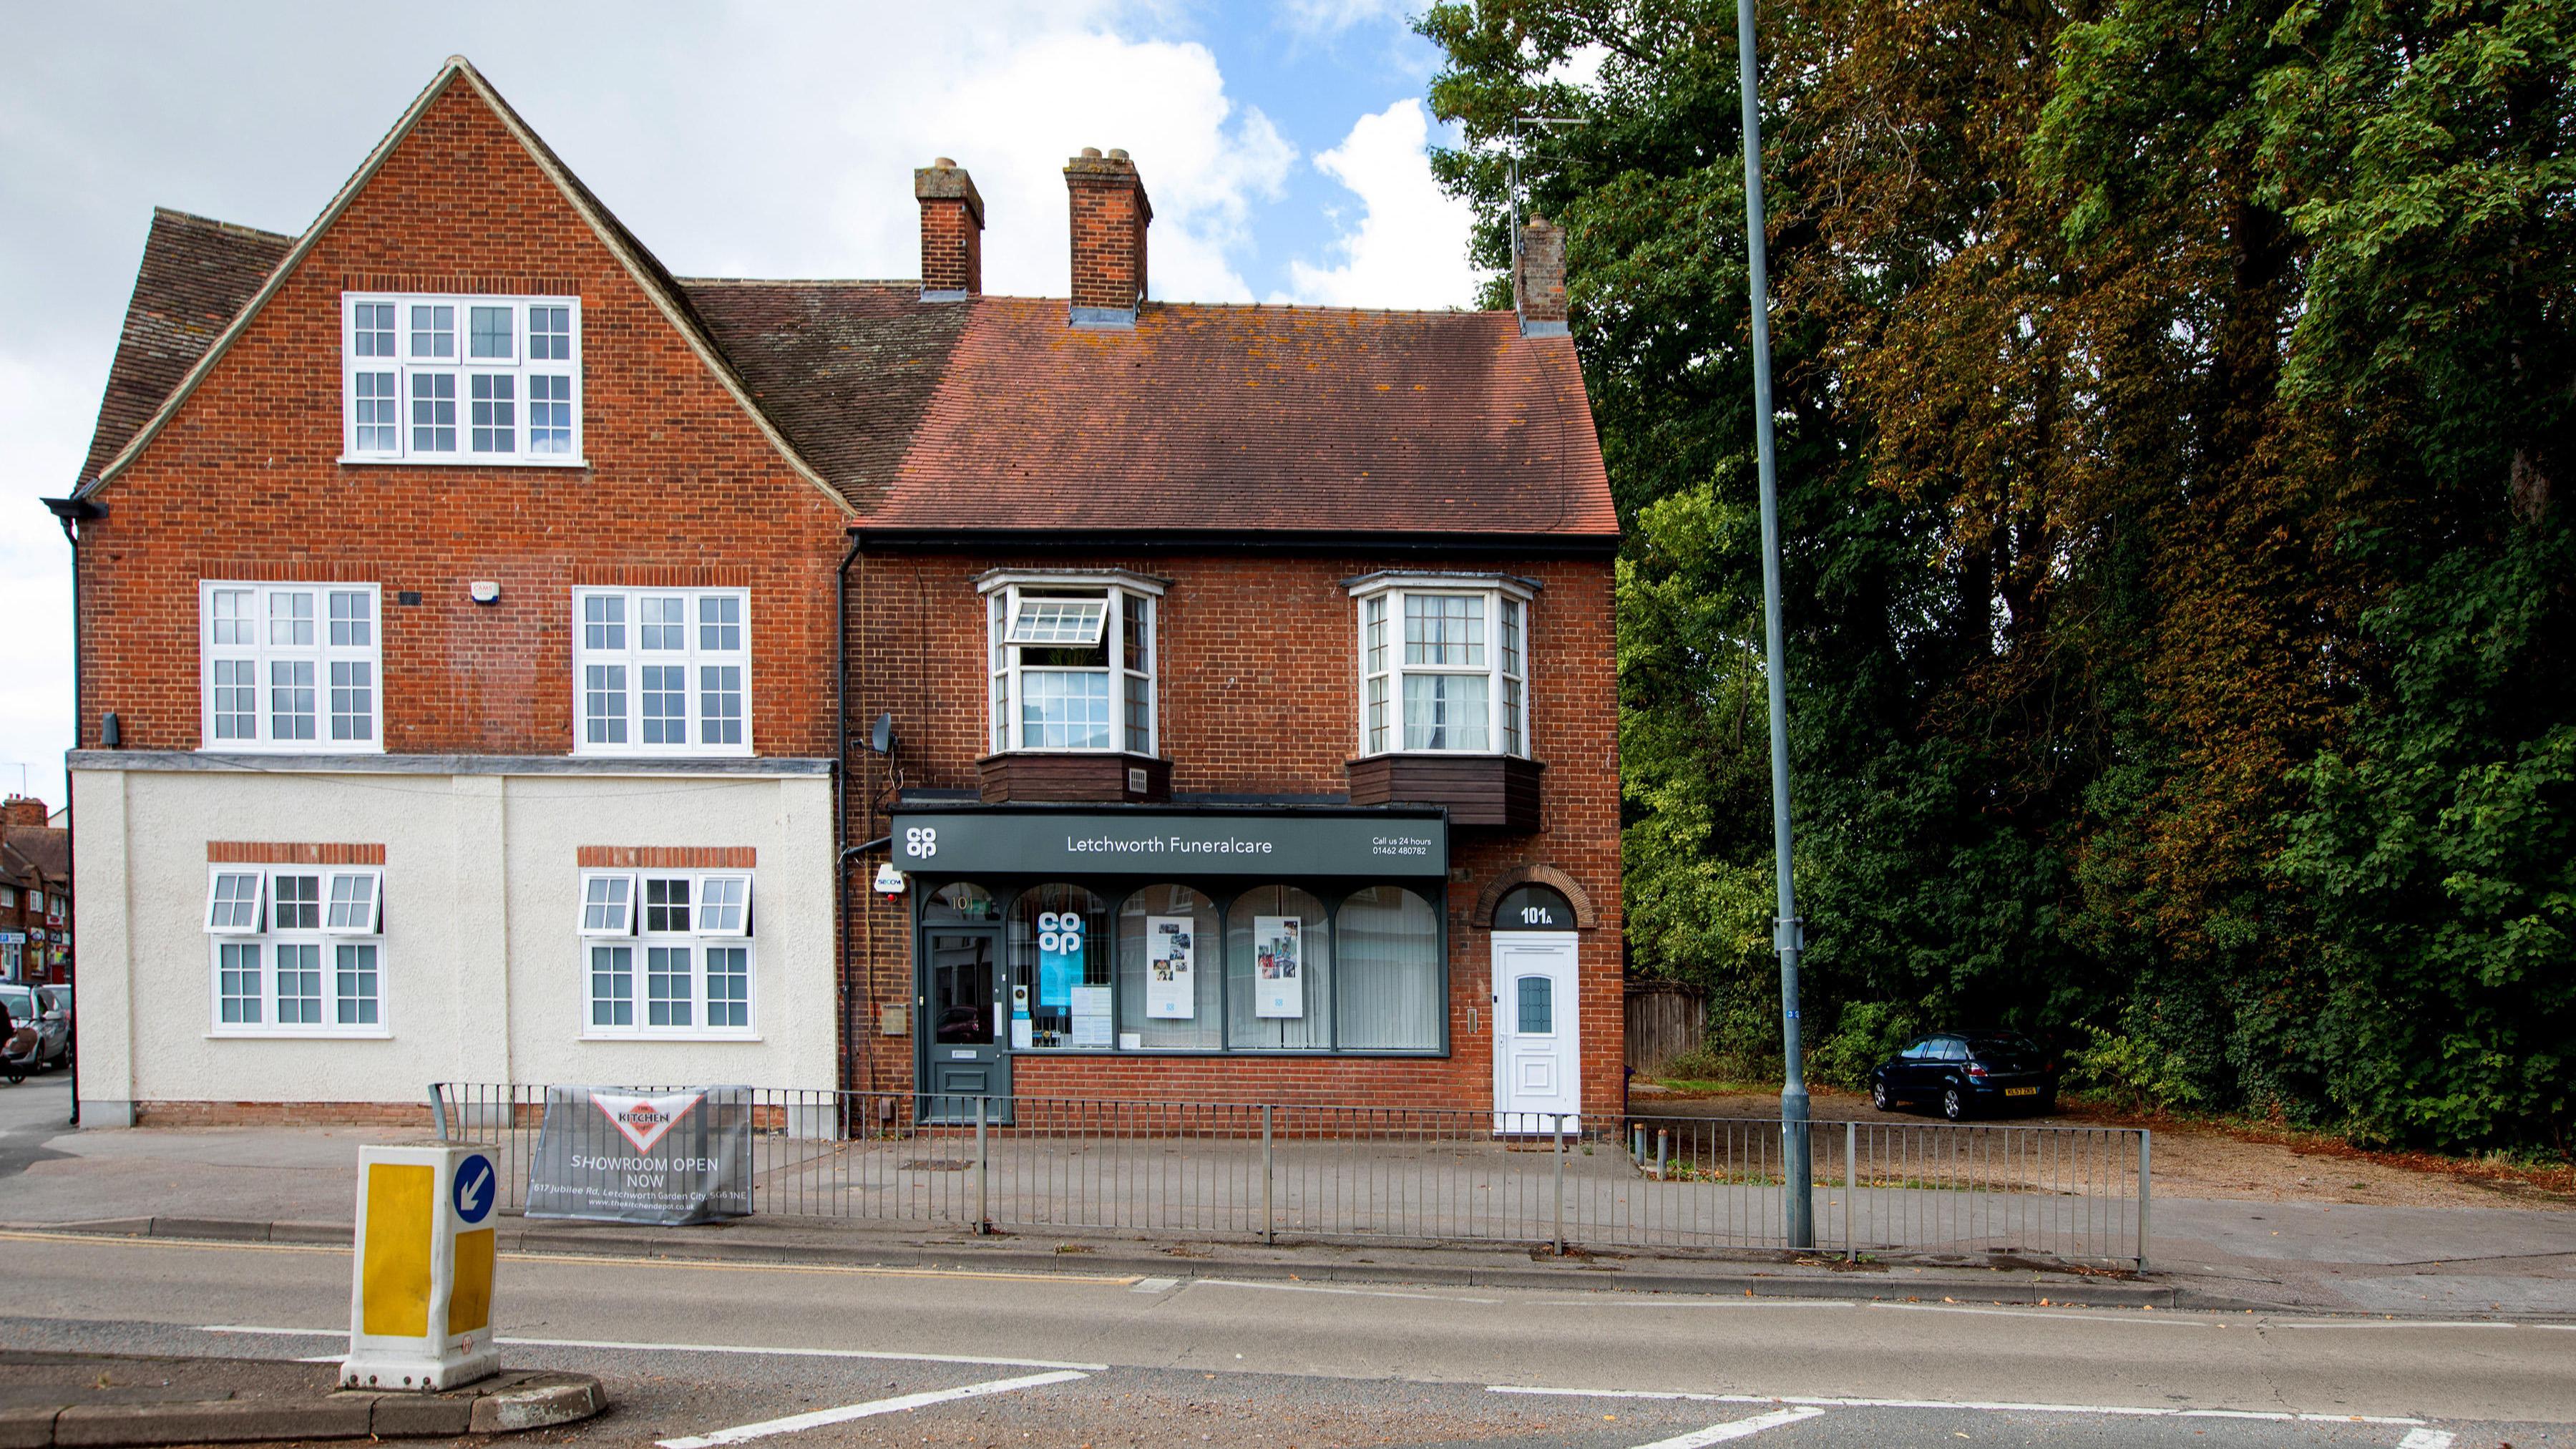 Images Letchworth Funeralcare